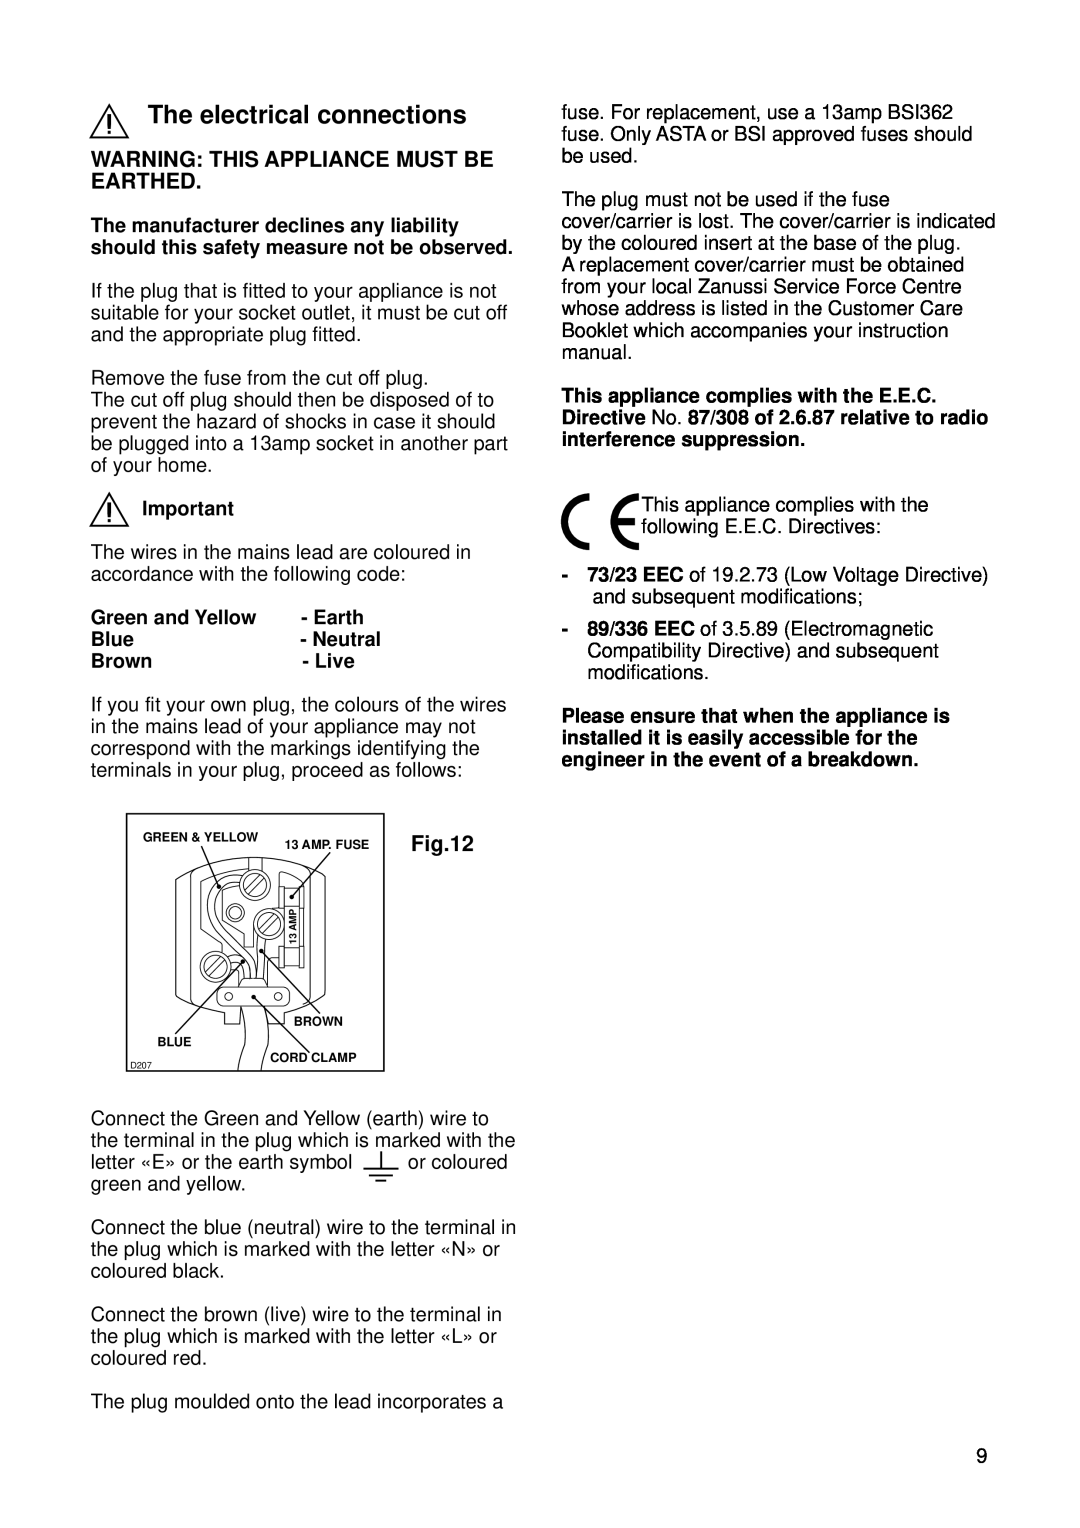 Zanussi ZI 718/12 K manual The electrical connections, Warning This Appliance Must Be Earthed 